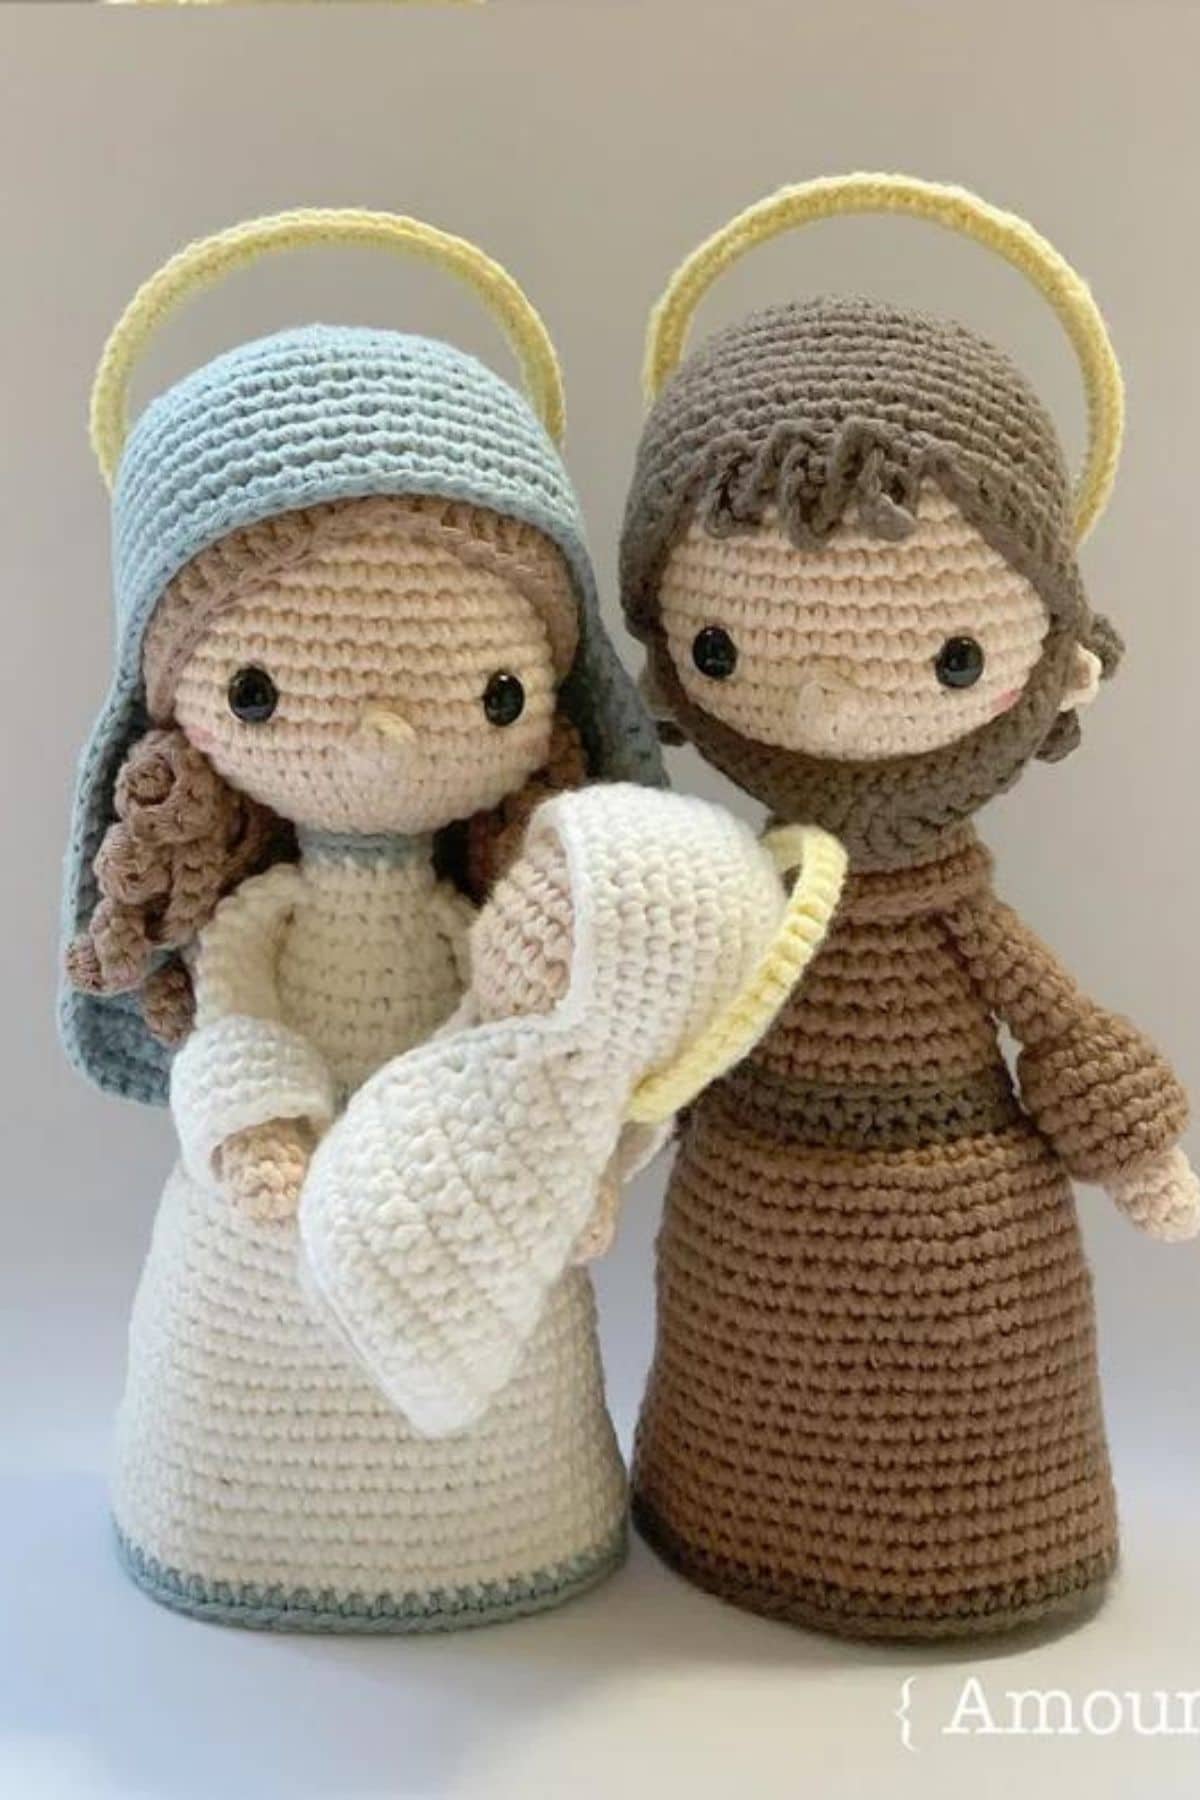 Large crochet Mary and Joseph in long white and brown dresses holding a small baby Jesus in a white blanket.